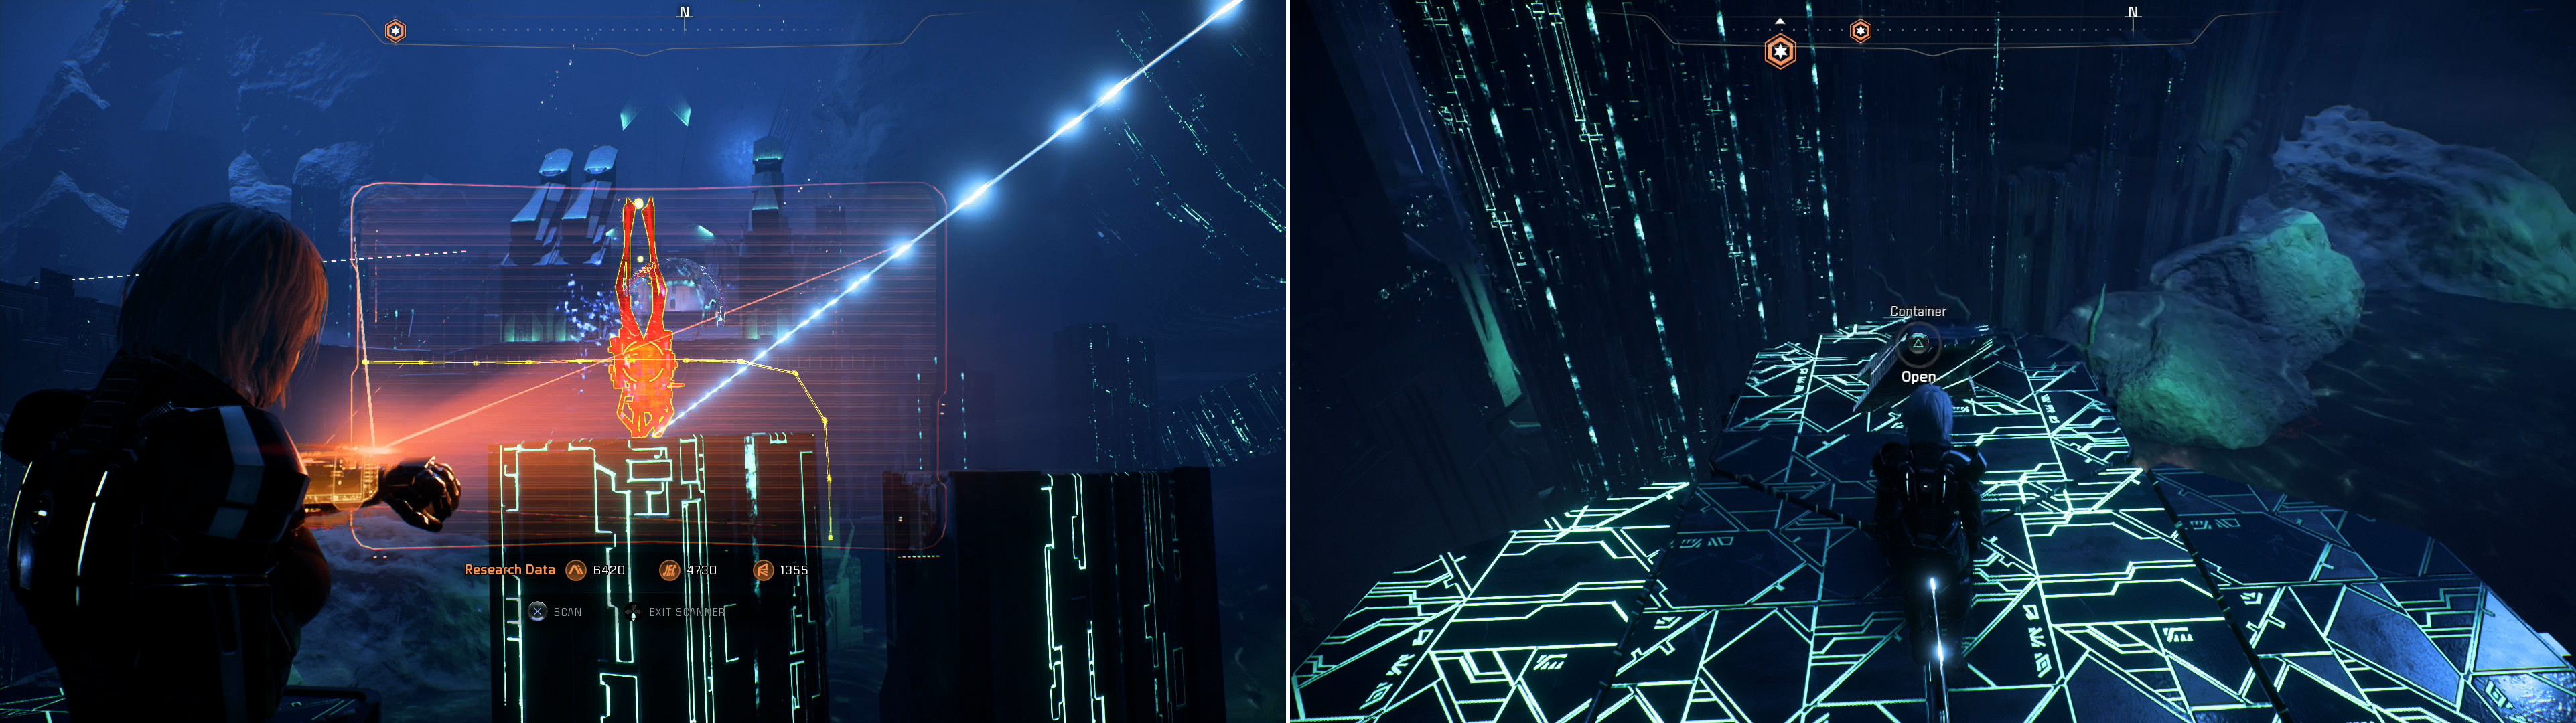 Activating linked Remnant Consoles to bring an Adaptive Remnant Core Device into scanning range (left). Other consoles lead to more conventional loot (right).